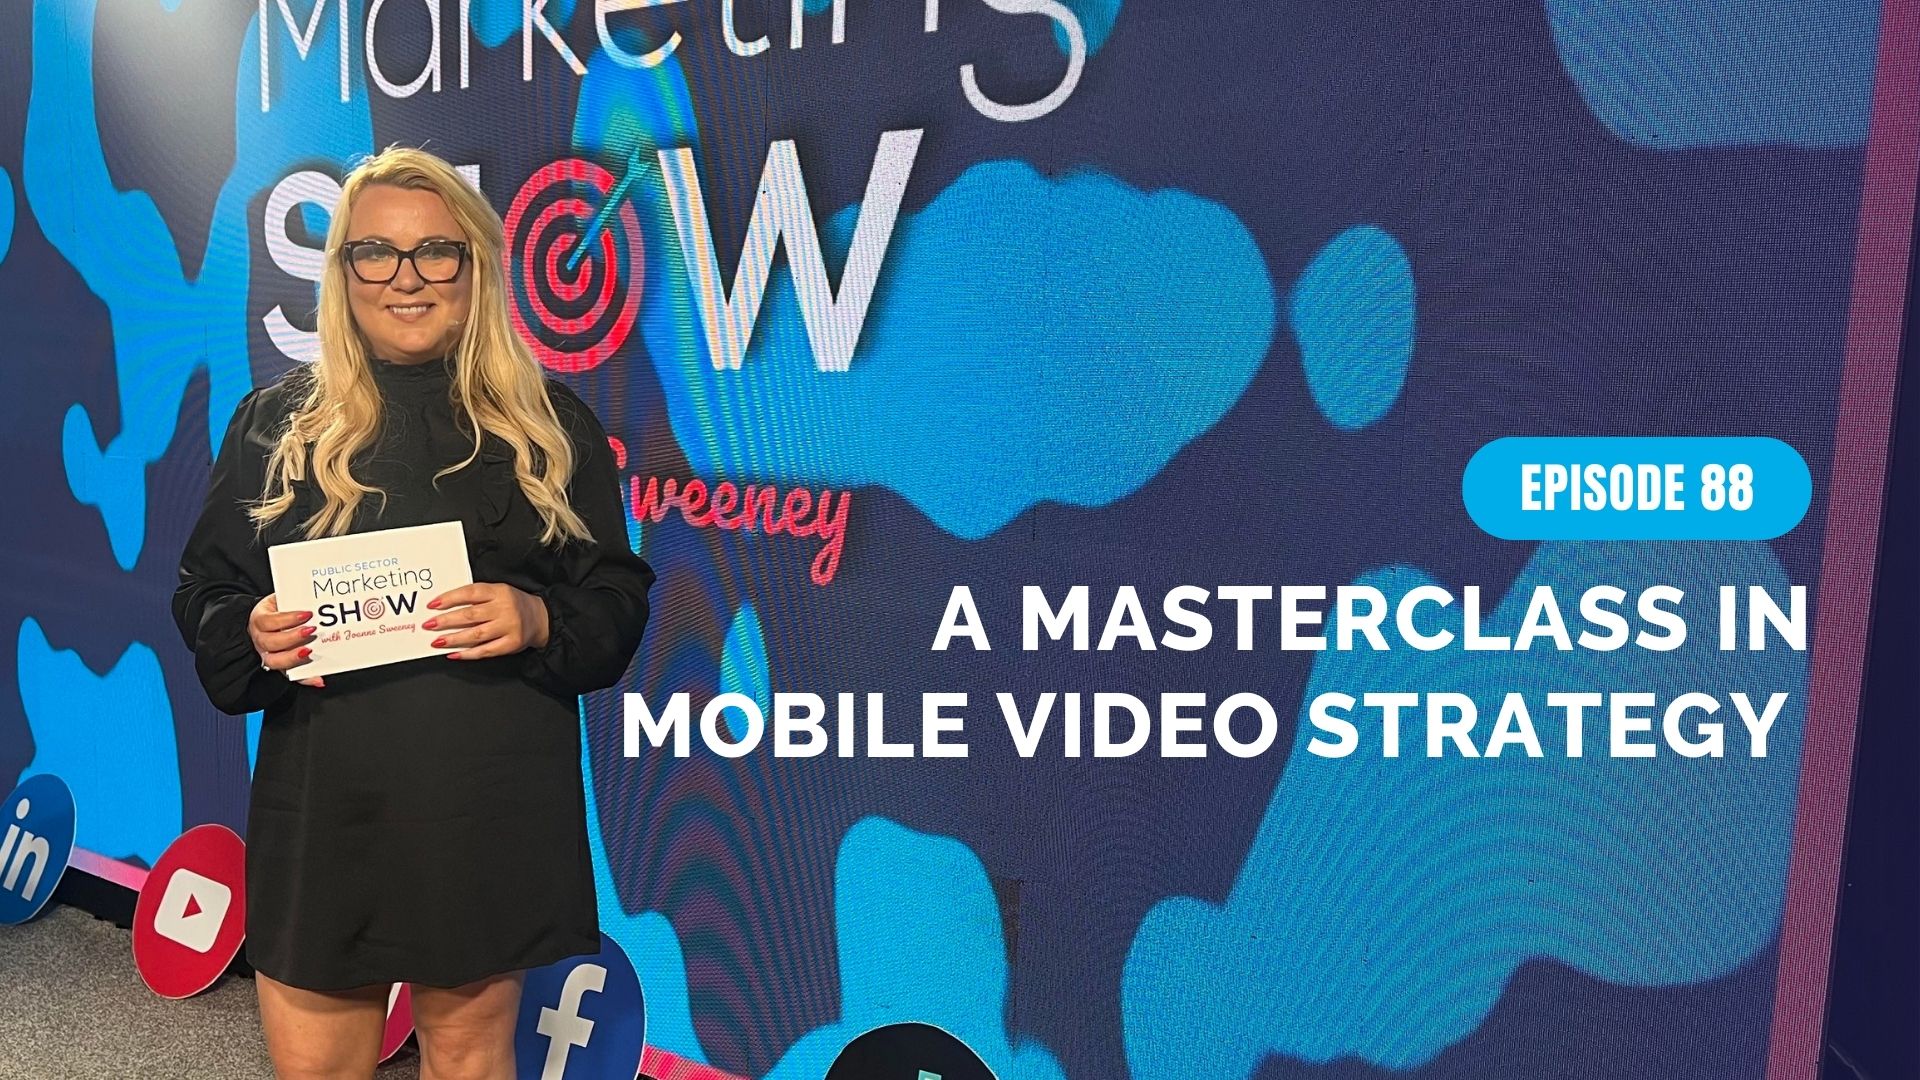 A Masterclass in Mobile Video Strategy